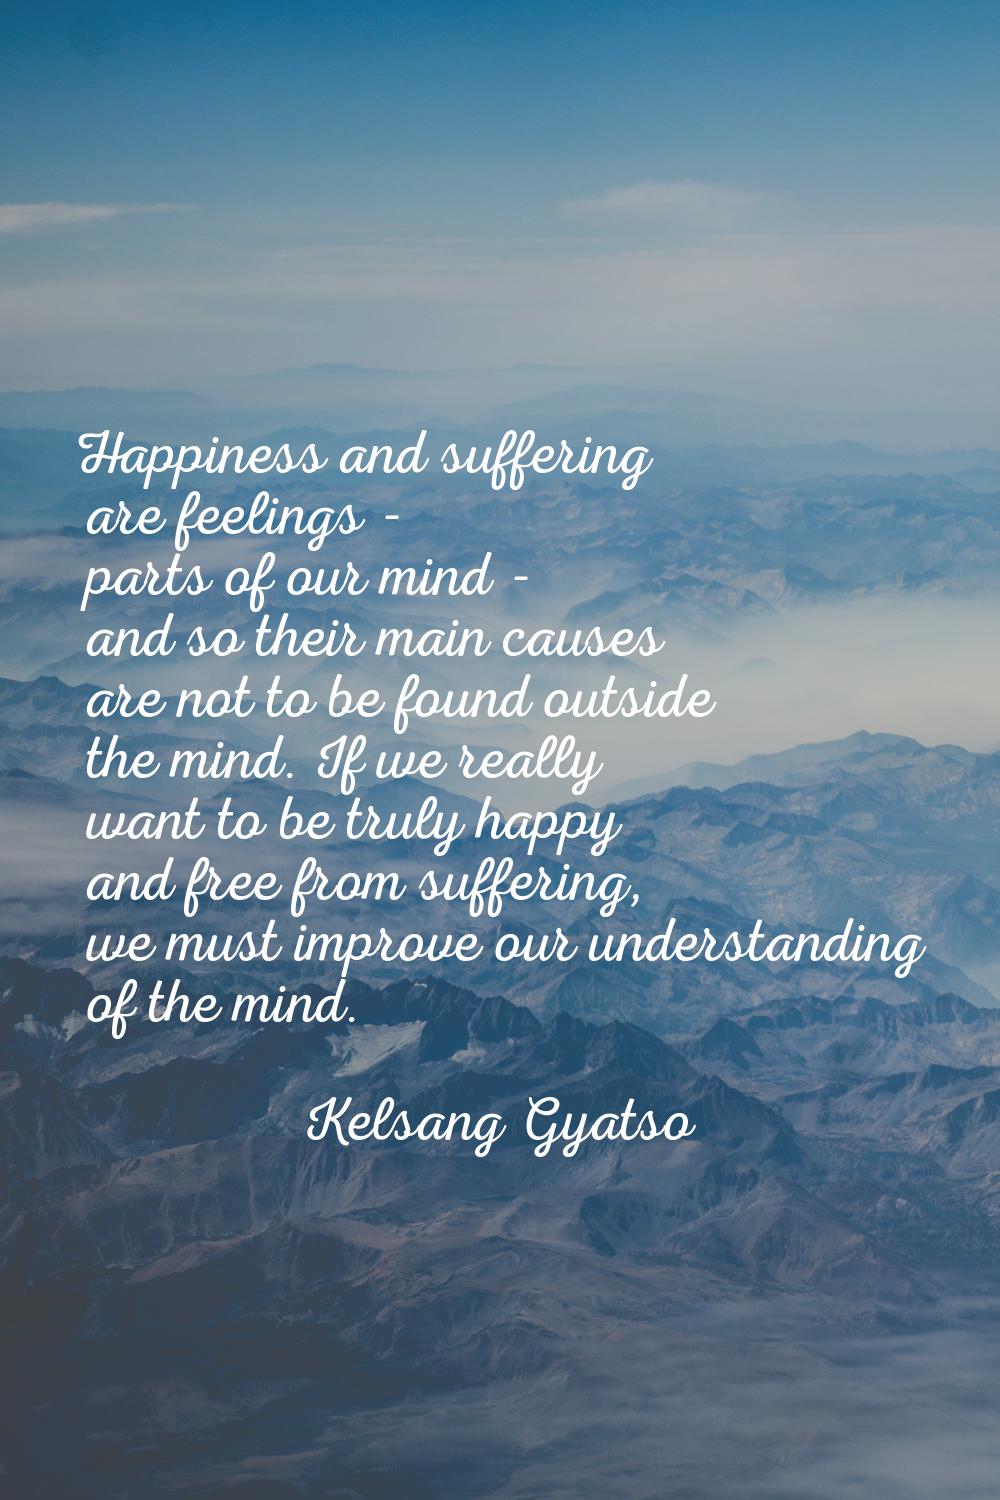 Happiness and suffering are feelings - parts of our mind - and so their main causes are not to be f